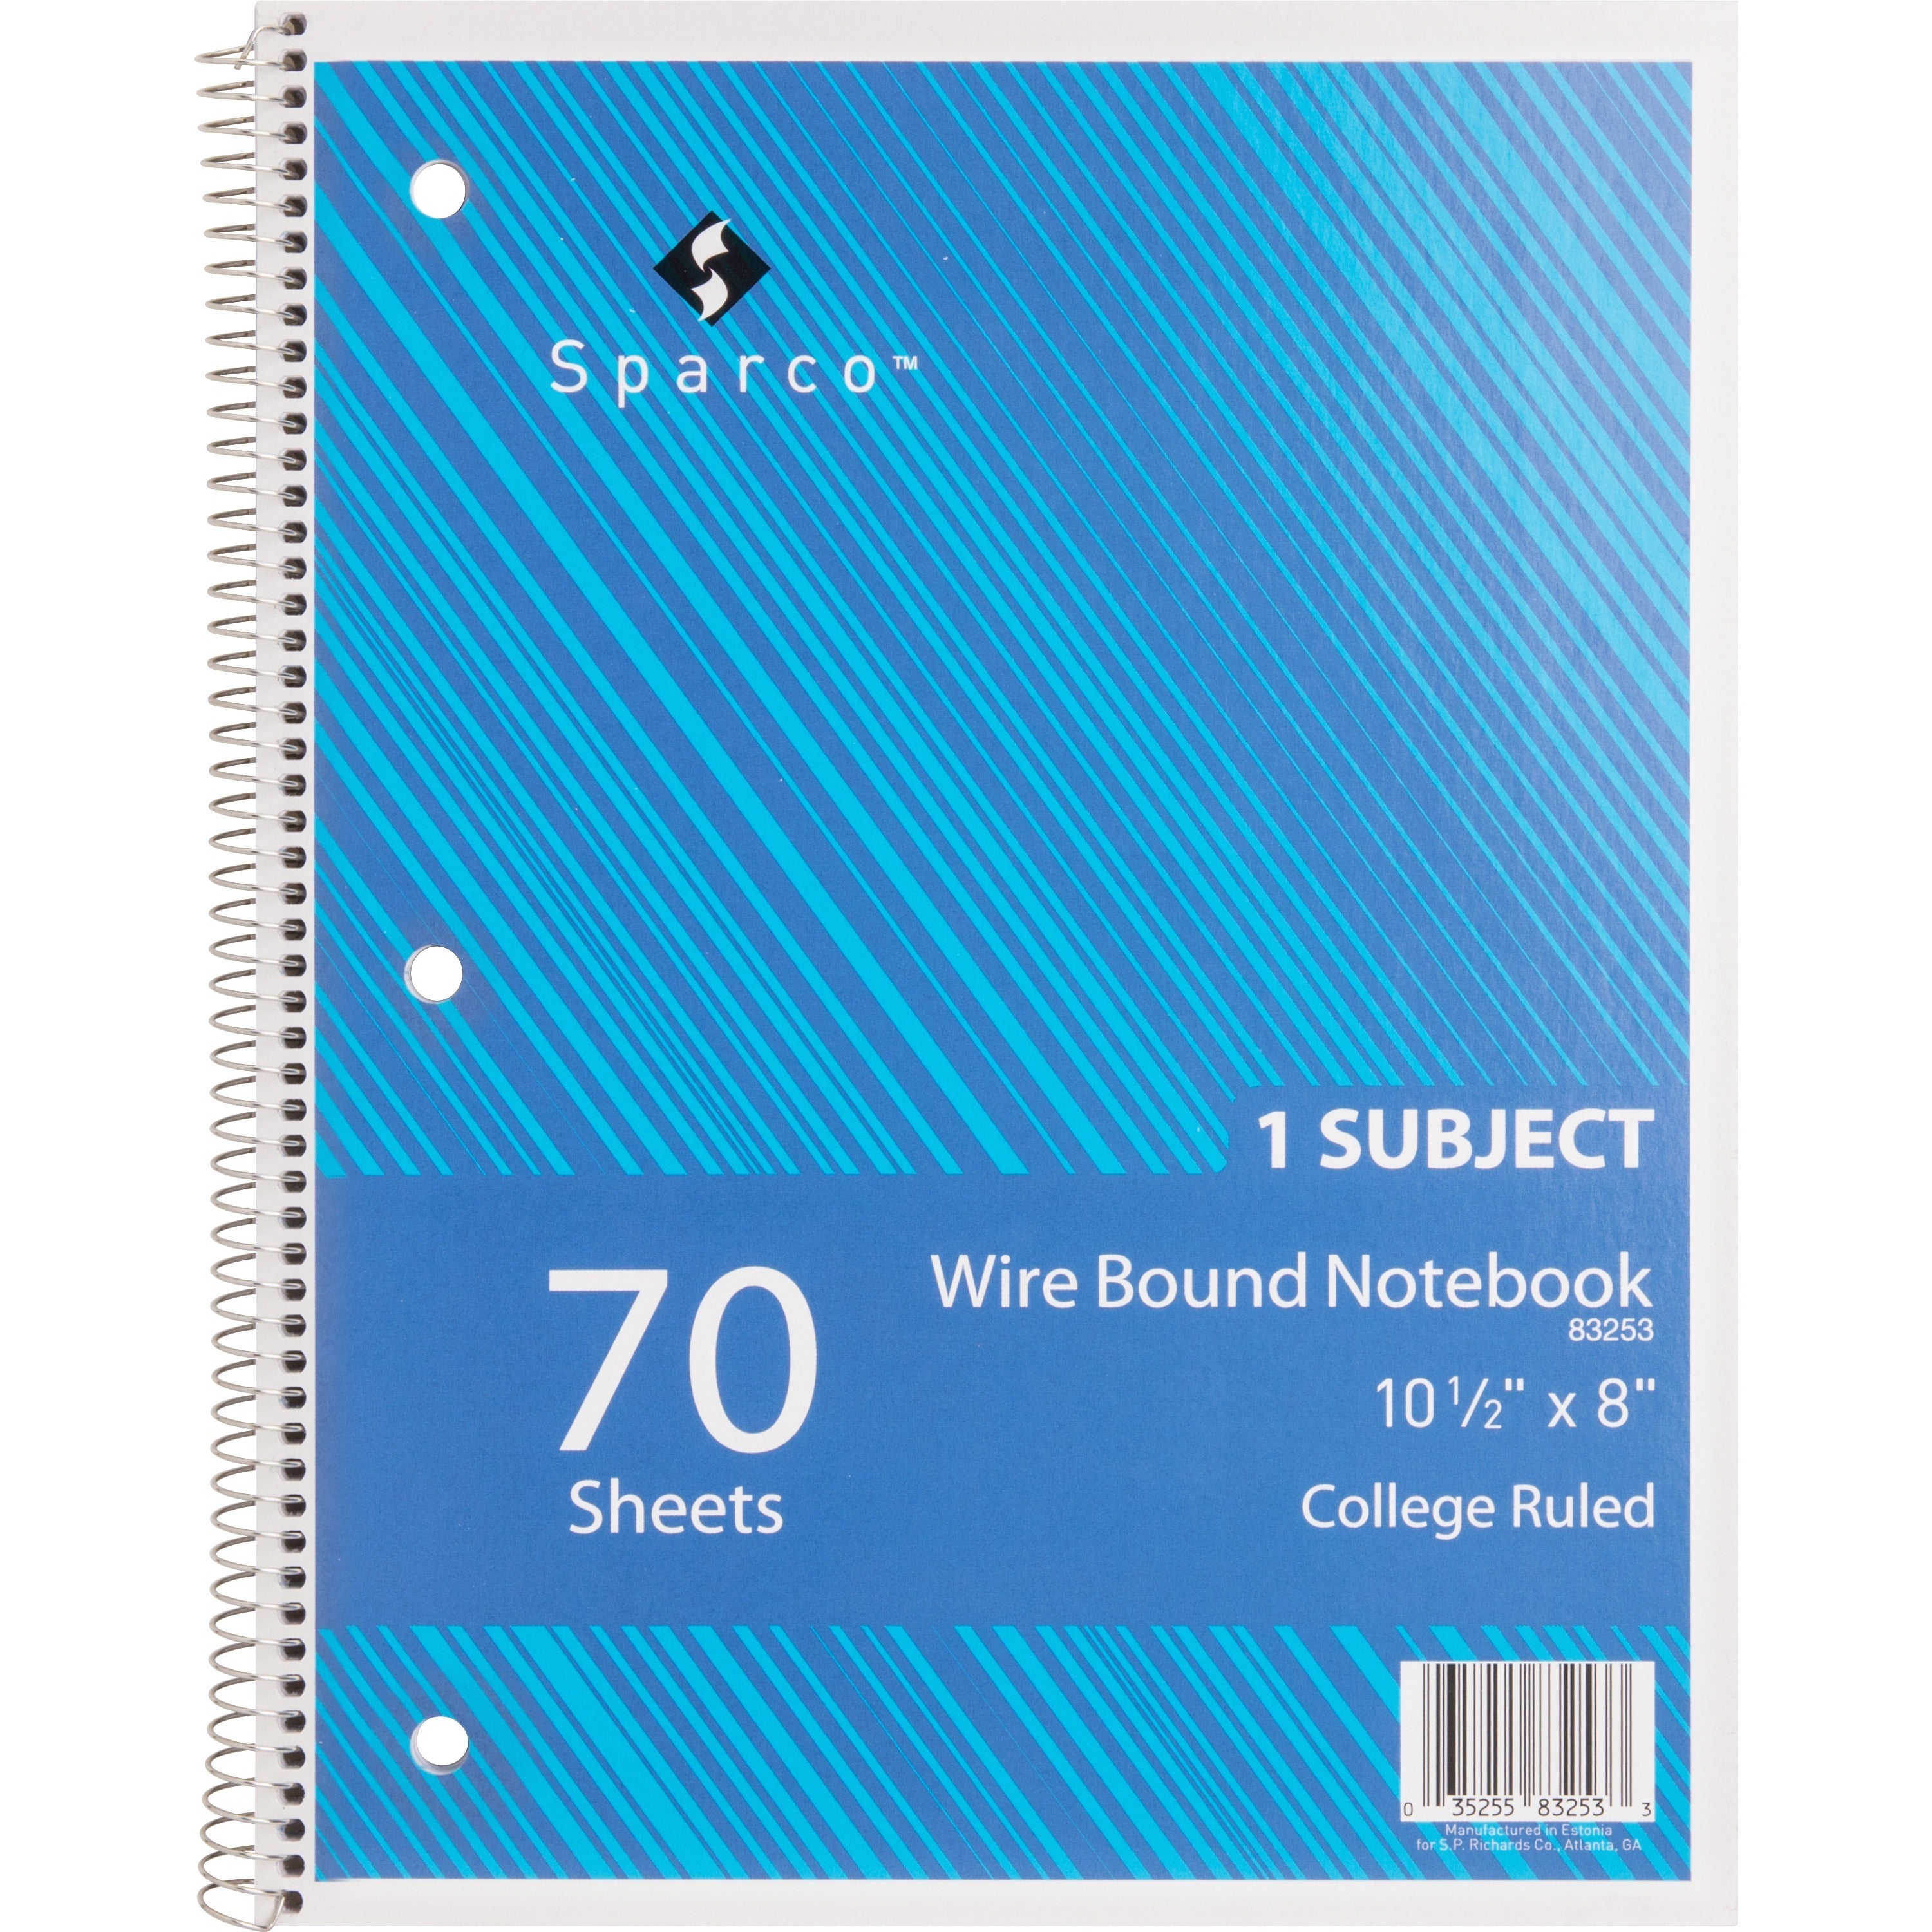 Sparco Wirebound Notebook - 70 Sheets - Wire Bound - College Ruled - Unruled Margin - 16 lb Basis Weight - 8" x 10 1/2" - Assorted Paper - AssortedChipboard Cover - Subject, Stiff-cover, Stiff-back, Perforated, Hole-punched - 1 Each - 